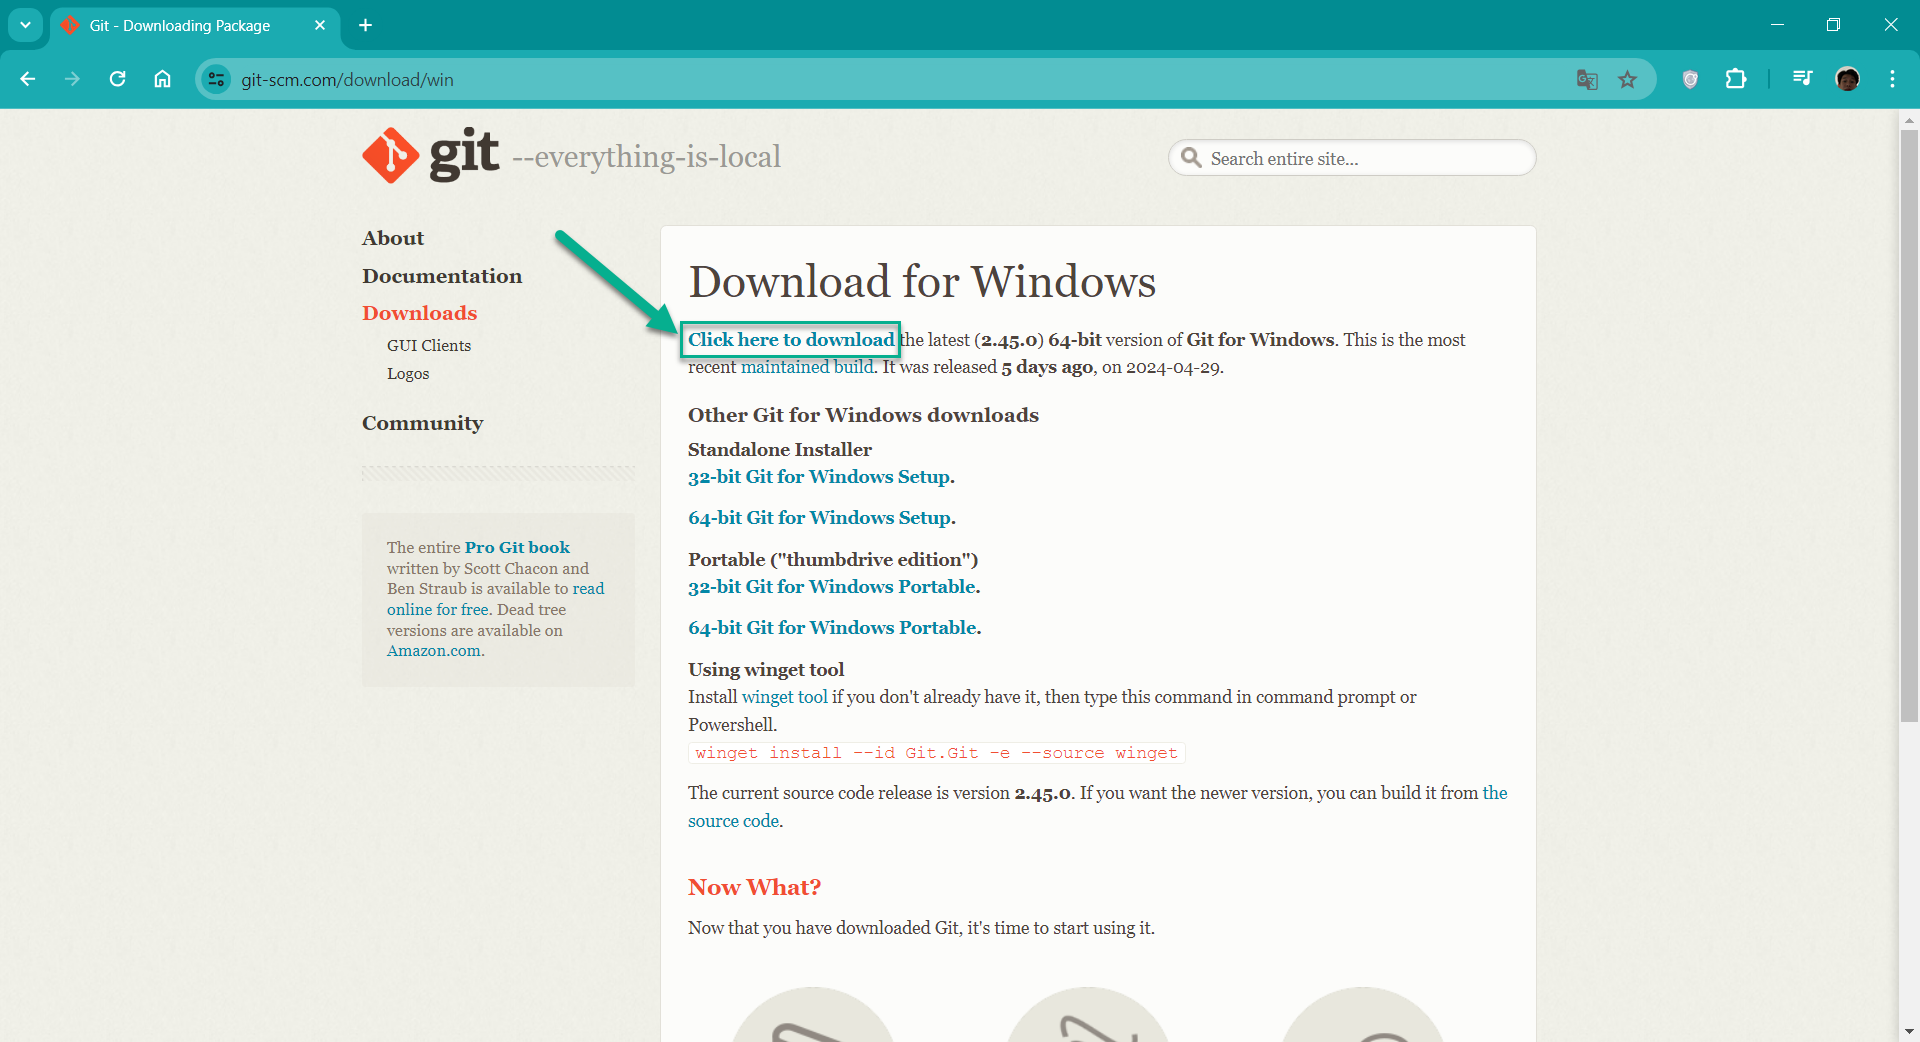 Download the latest version of Git by clicking the first link